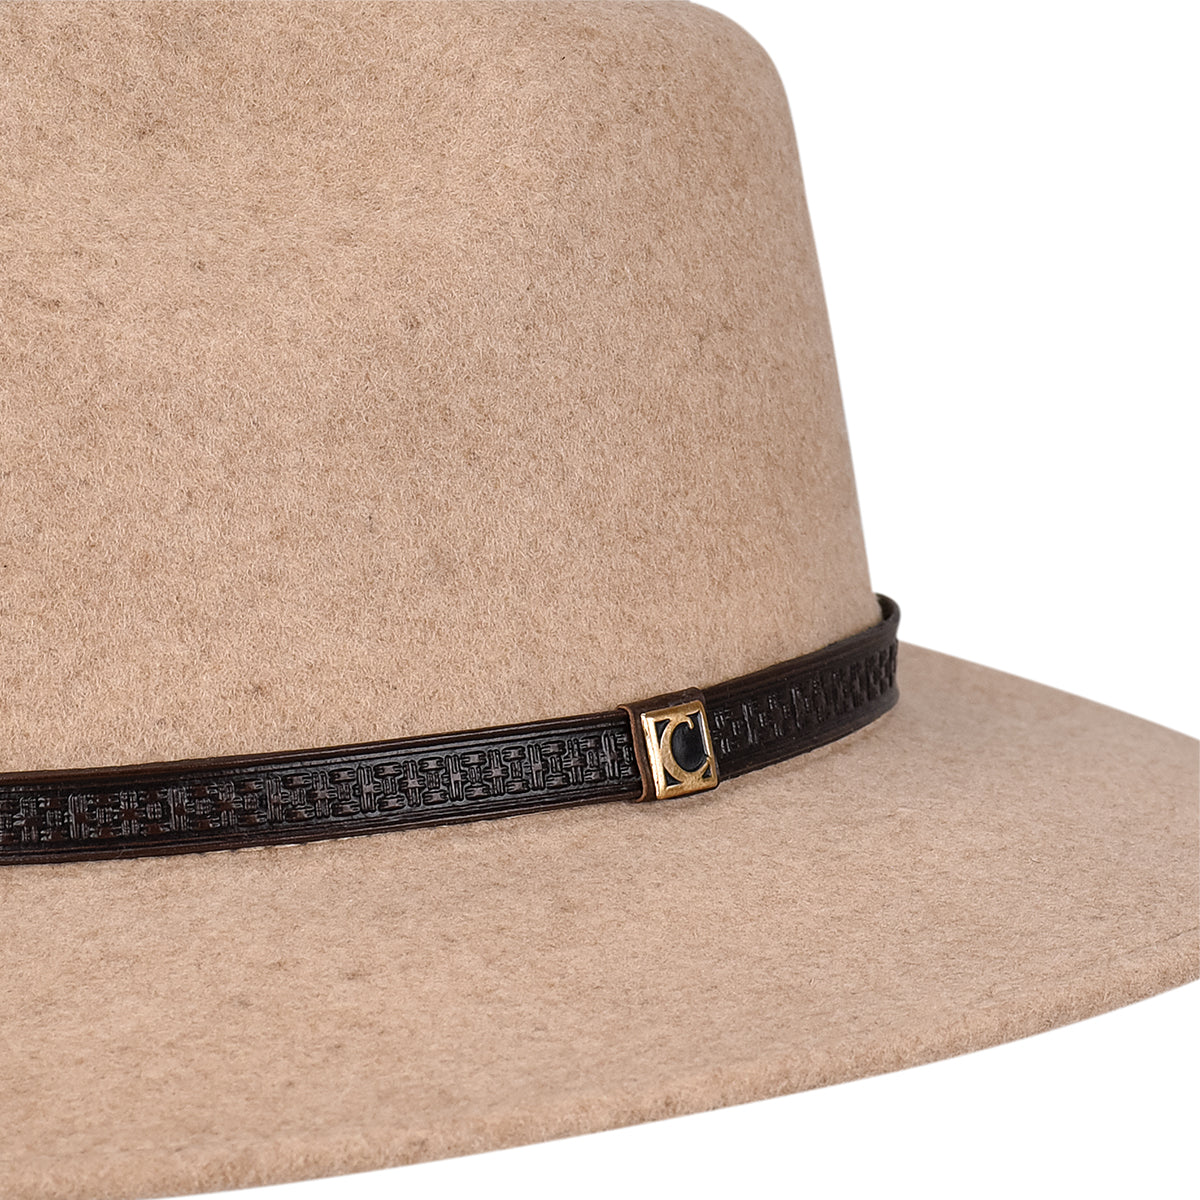 Cuadra sand color hat with leather belt